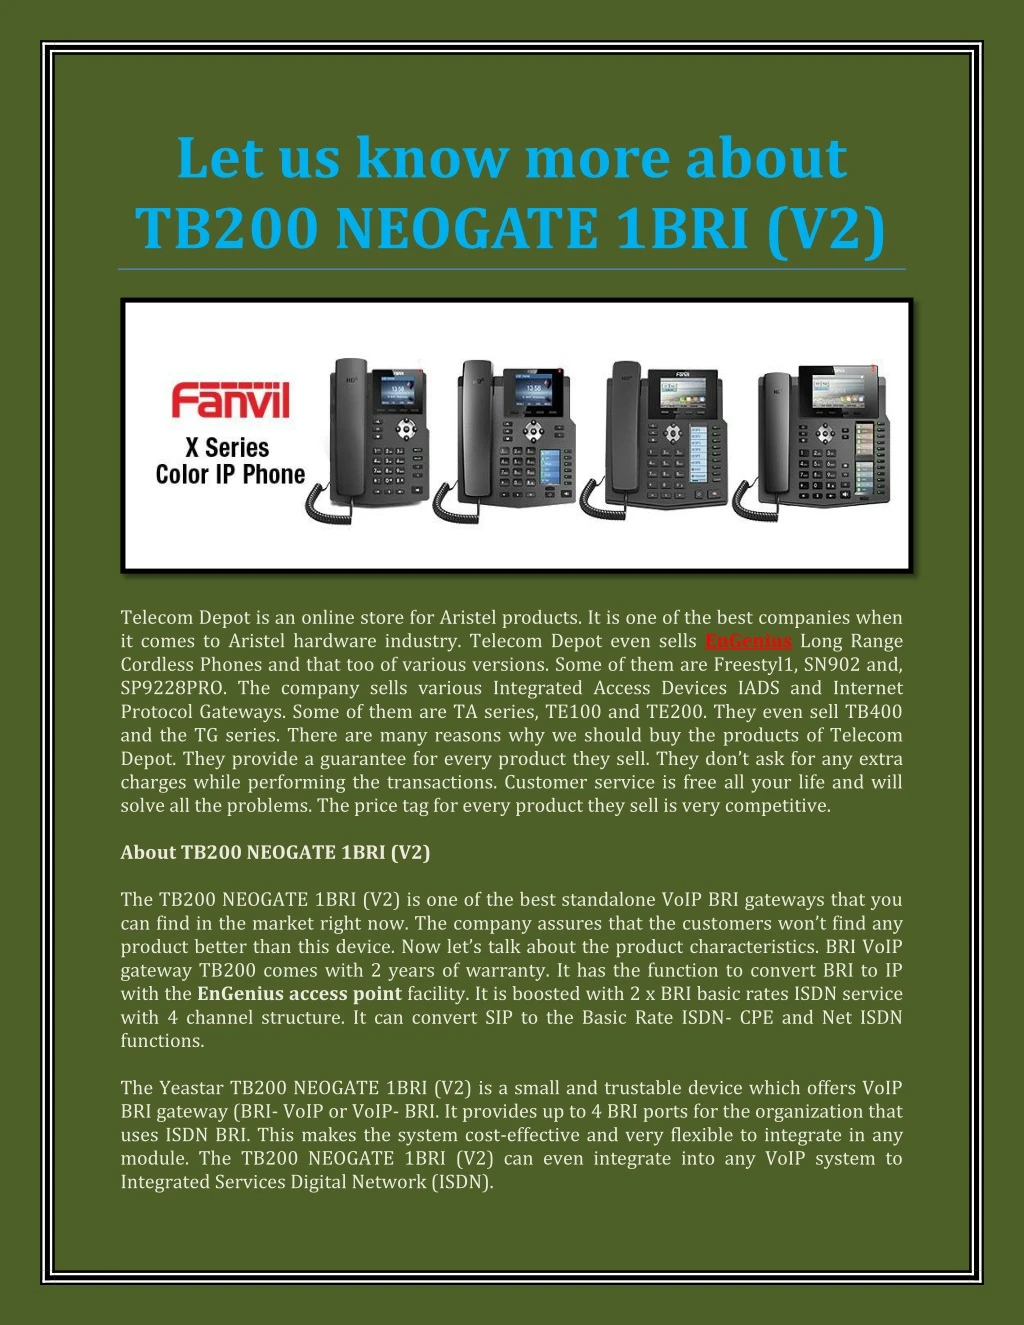 let us know more about tb200 neogate 1bri v2